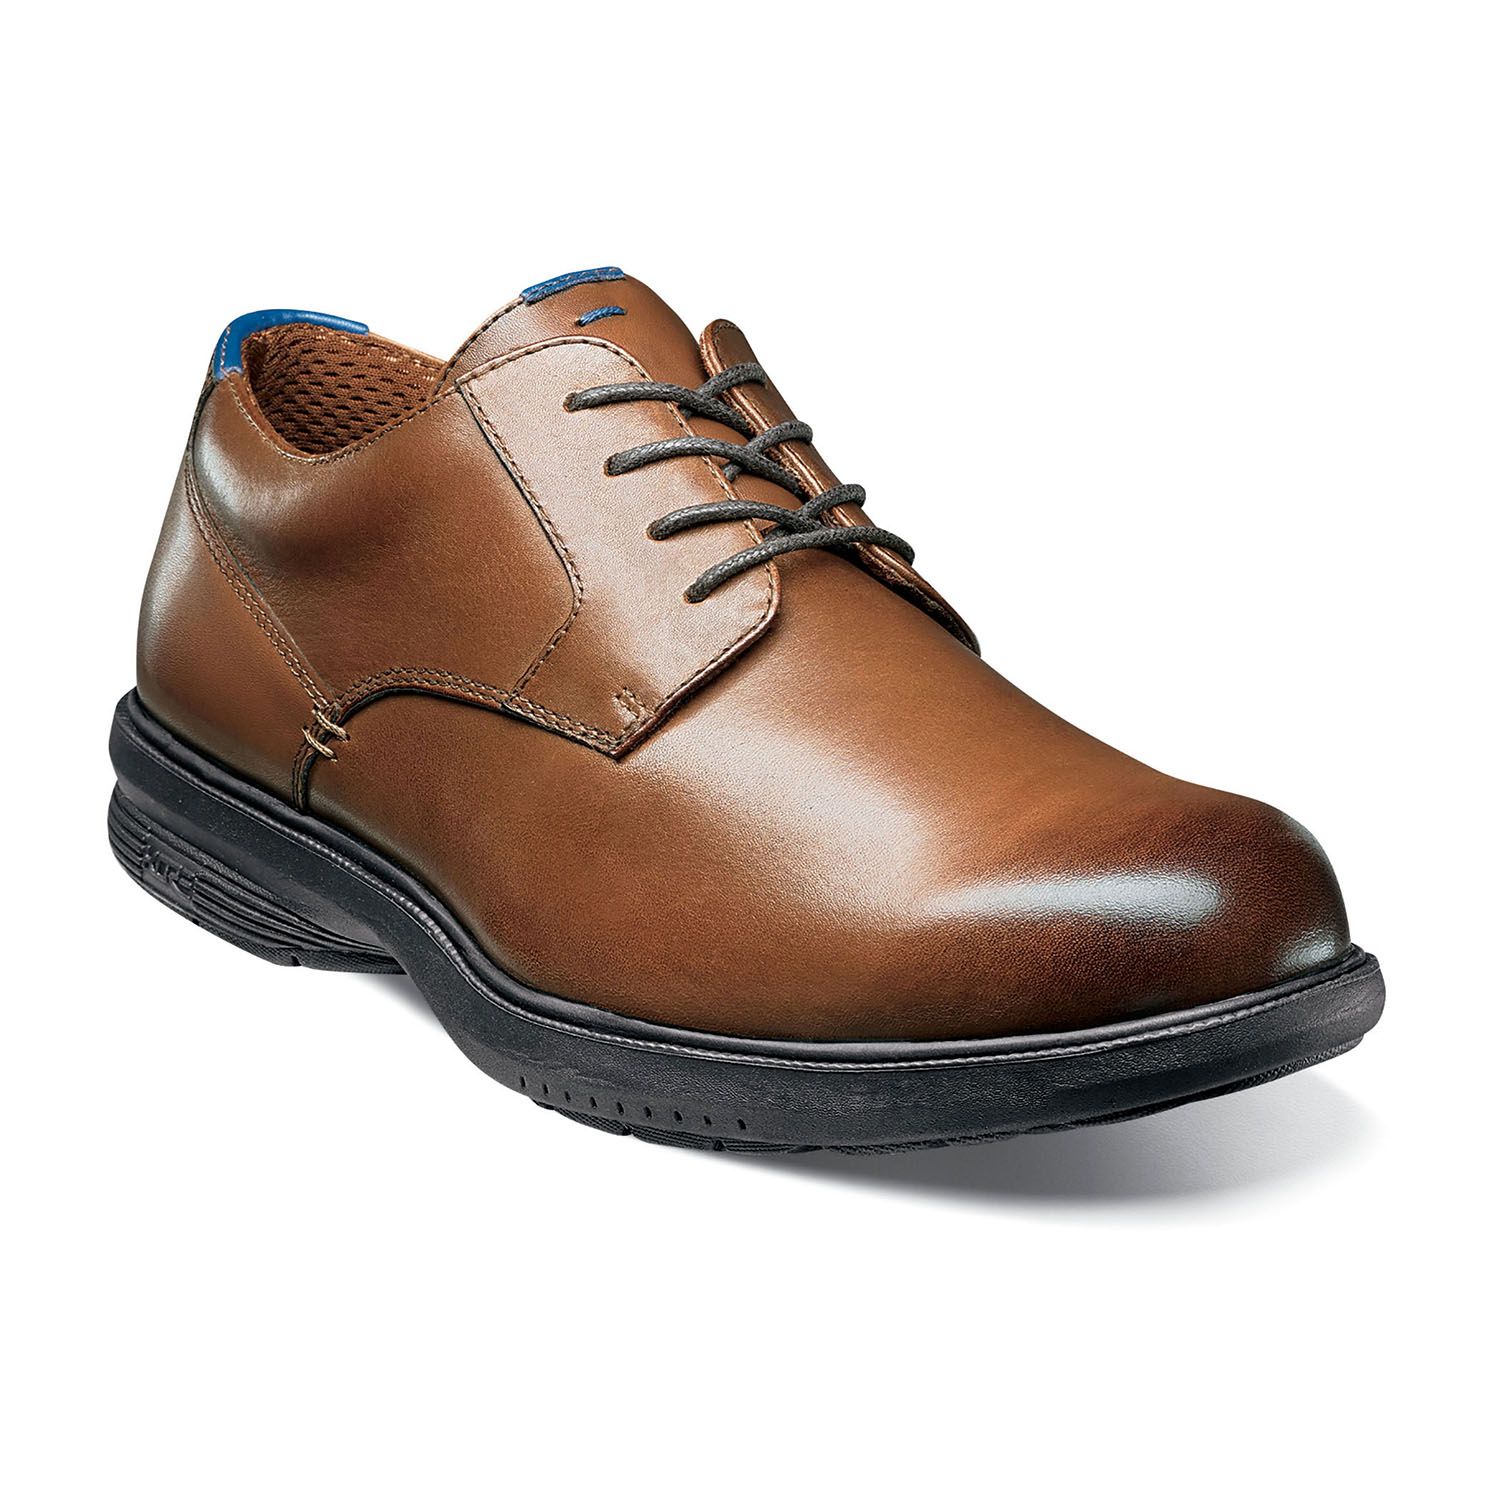 Mens Extra Wide Dress Shoes | Kohl's